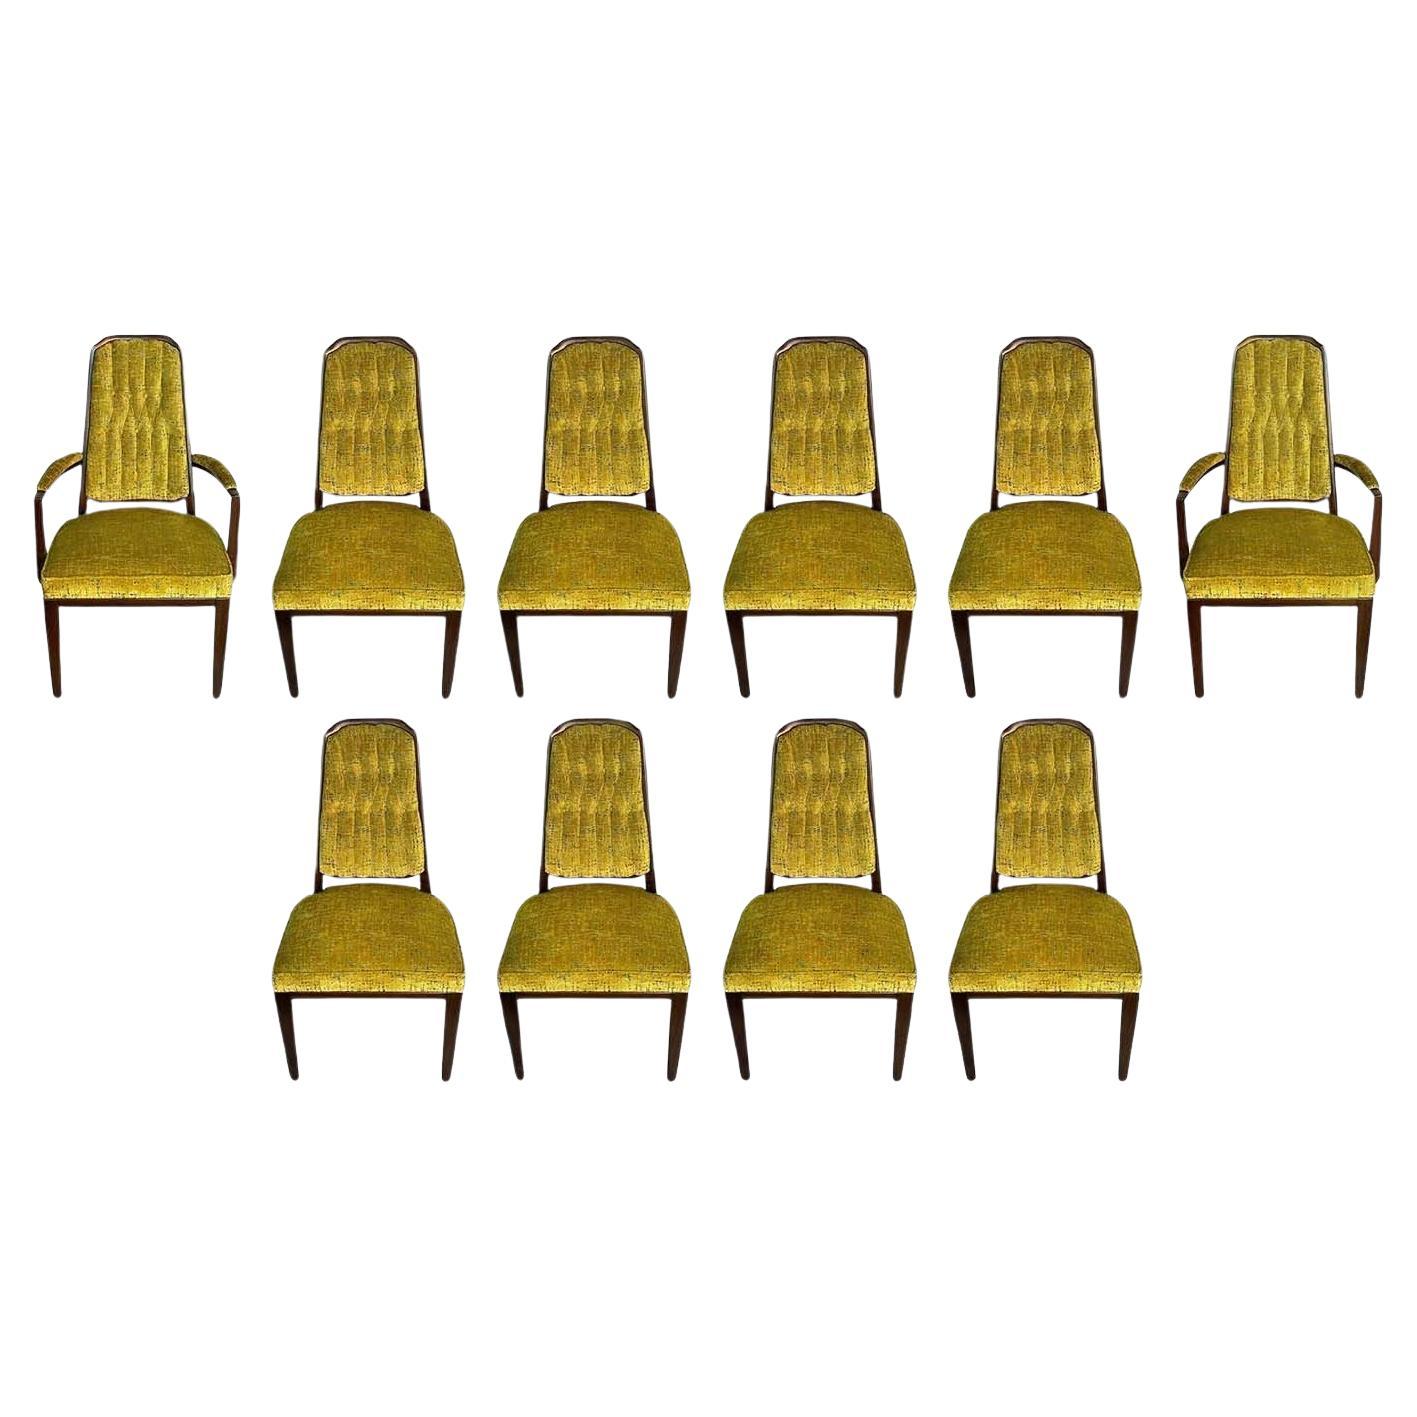 Set of 10 Vintage Monteverdi Young Chairs & Armchairs, c. 1950's